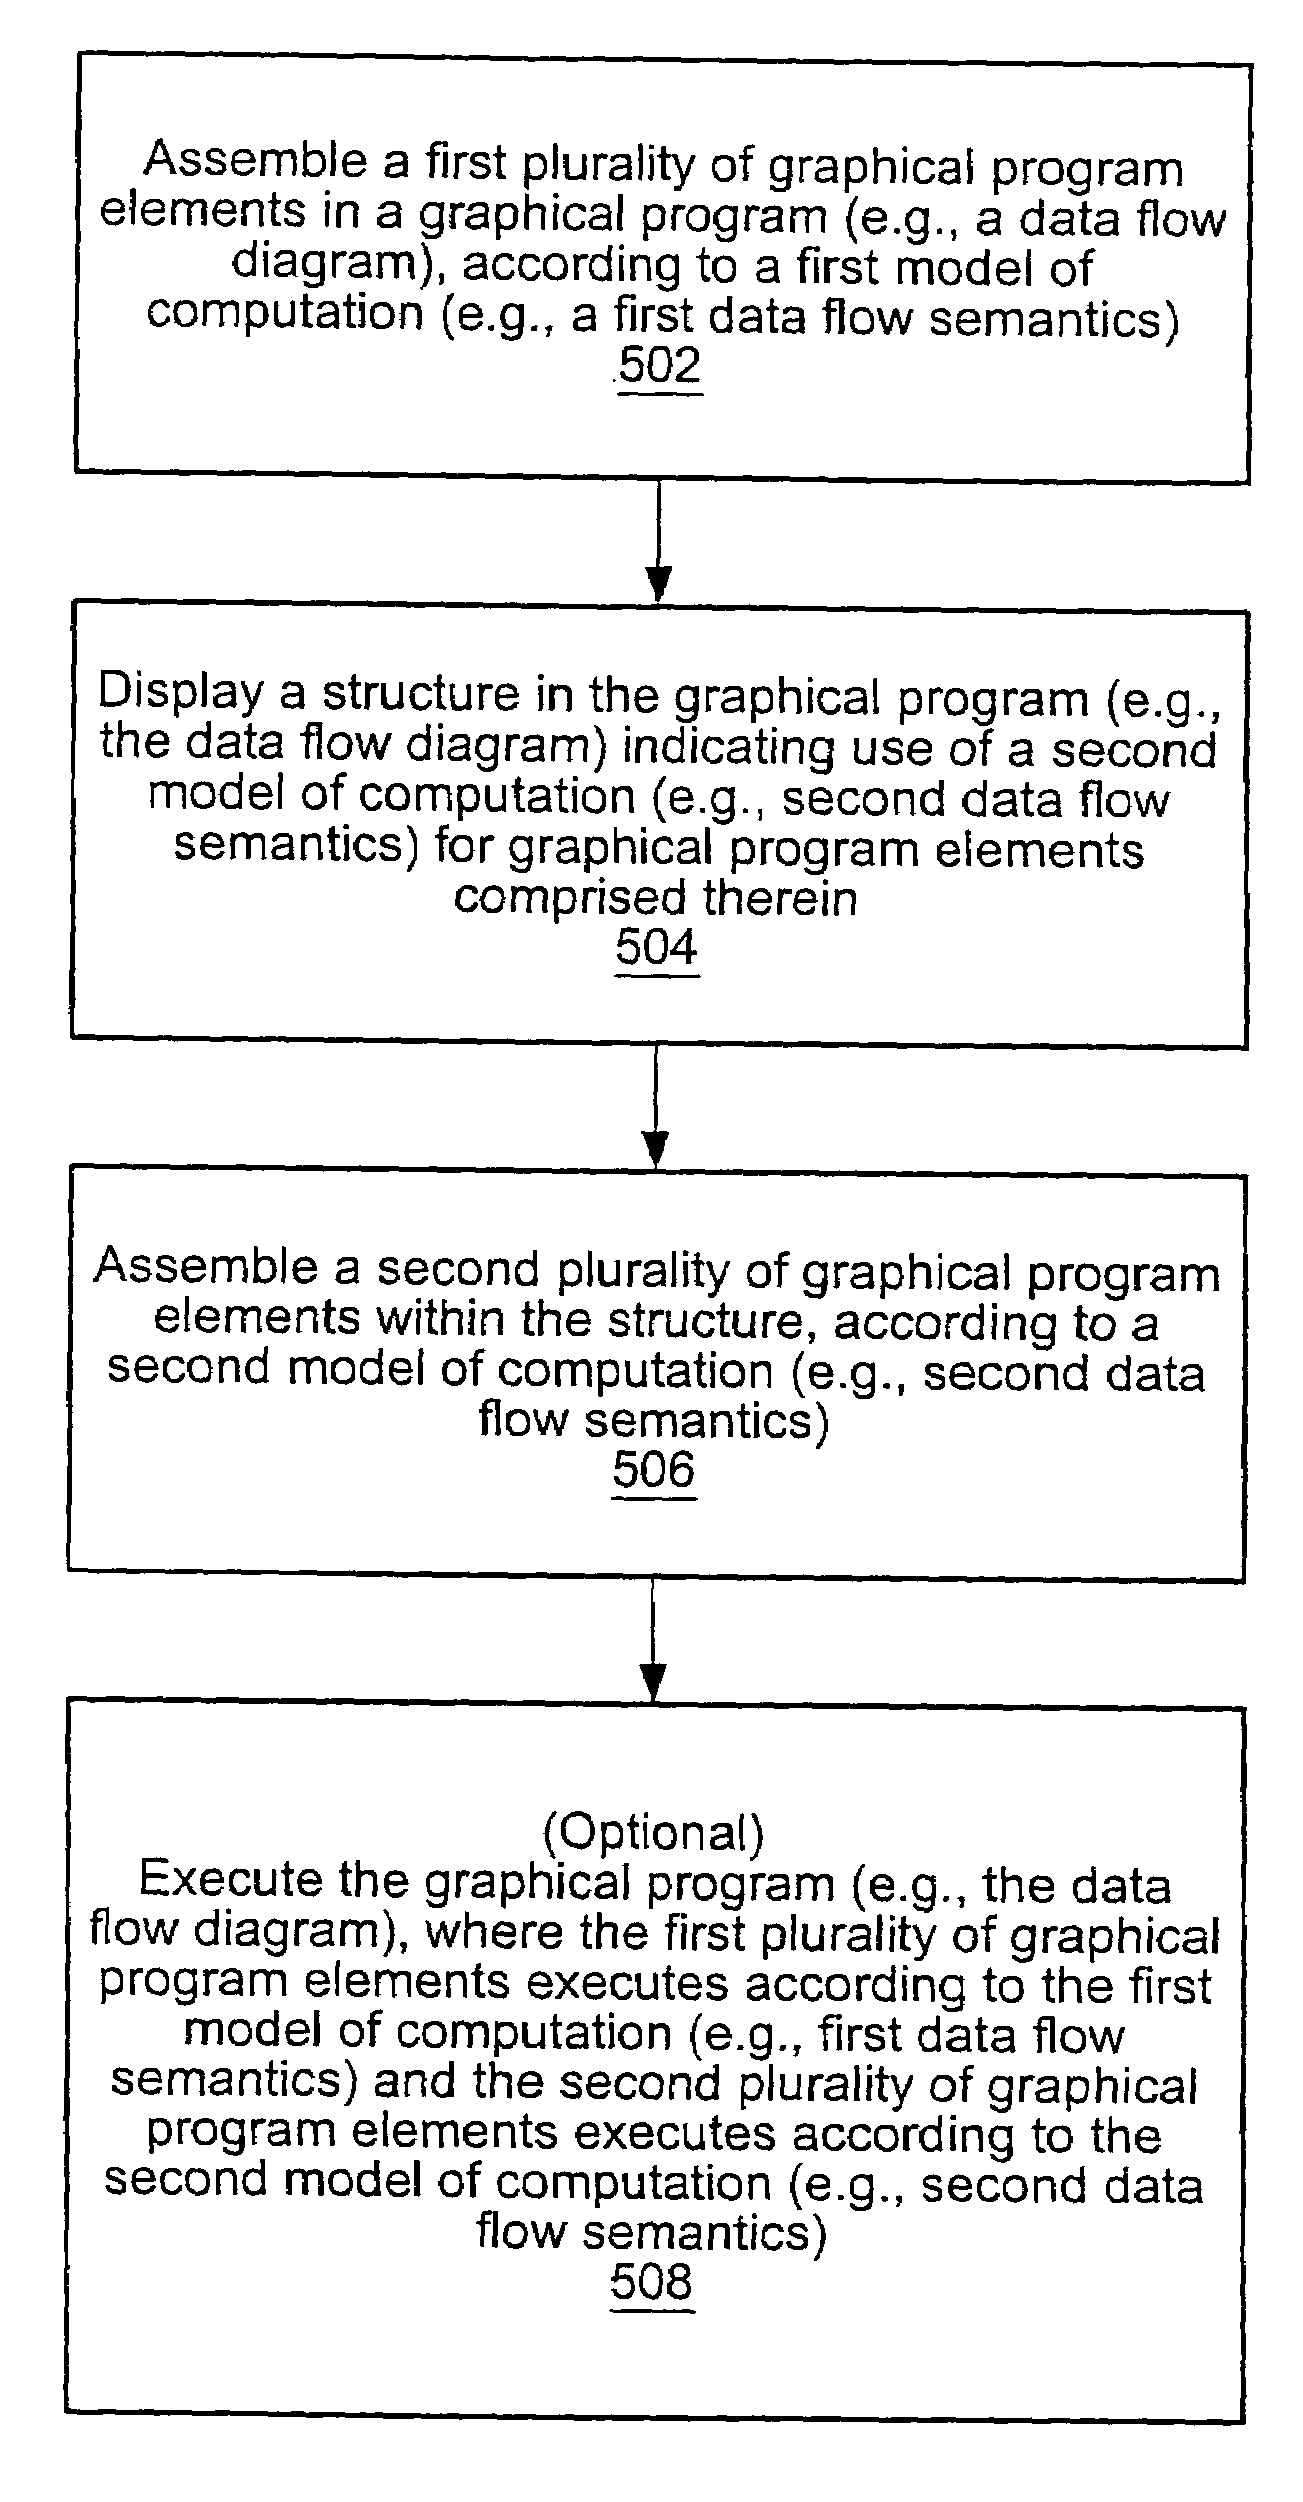 Graphical data flow programming environment with first model of computation that includes a structure supporting second model of computation